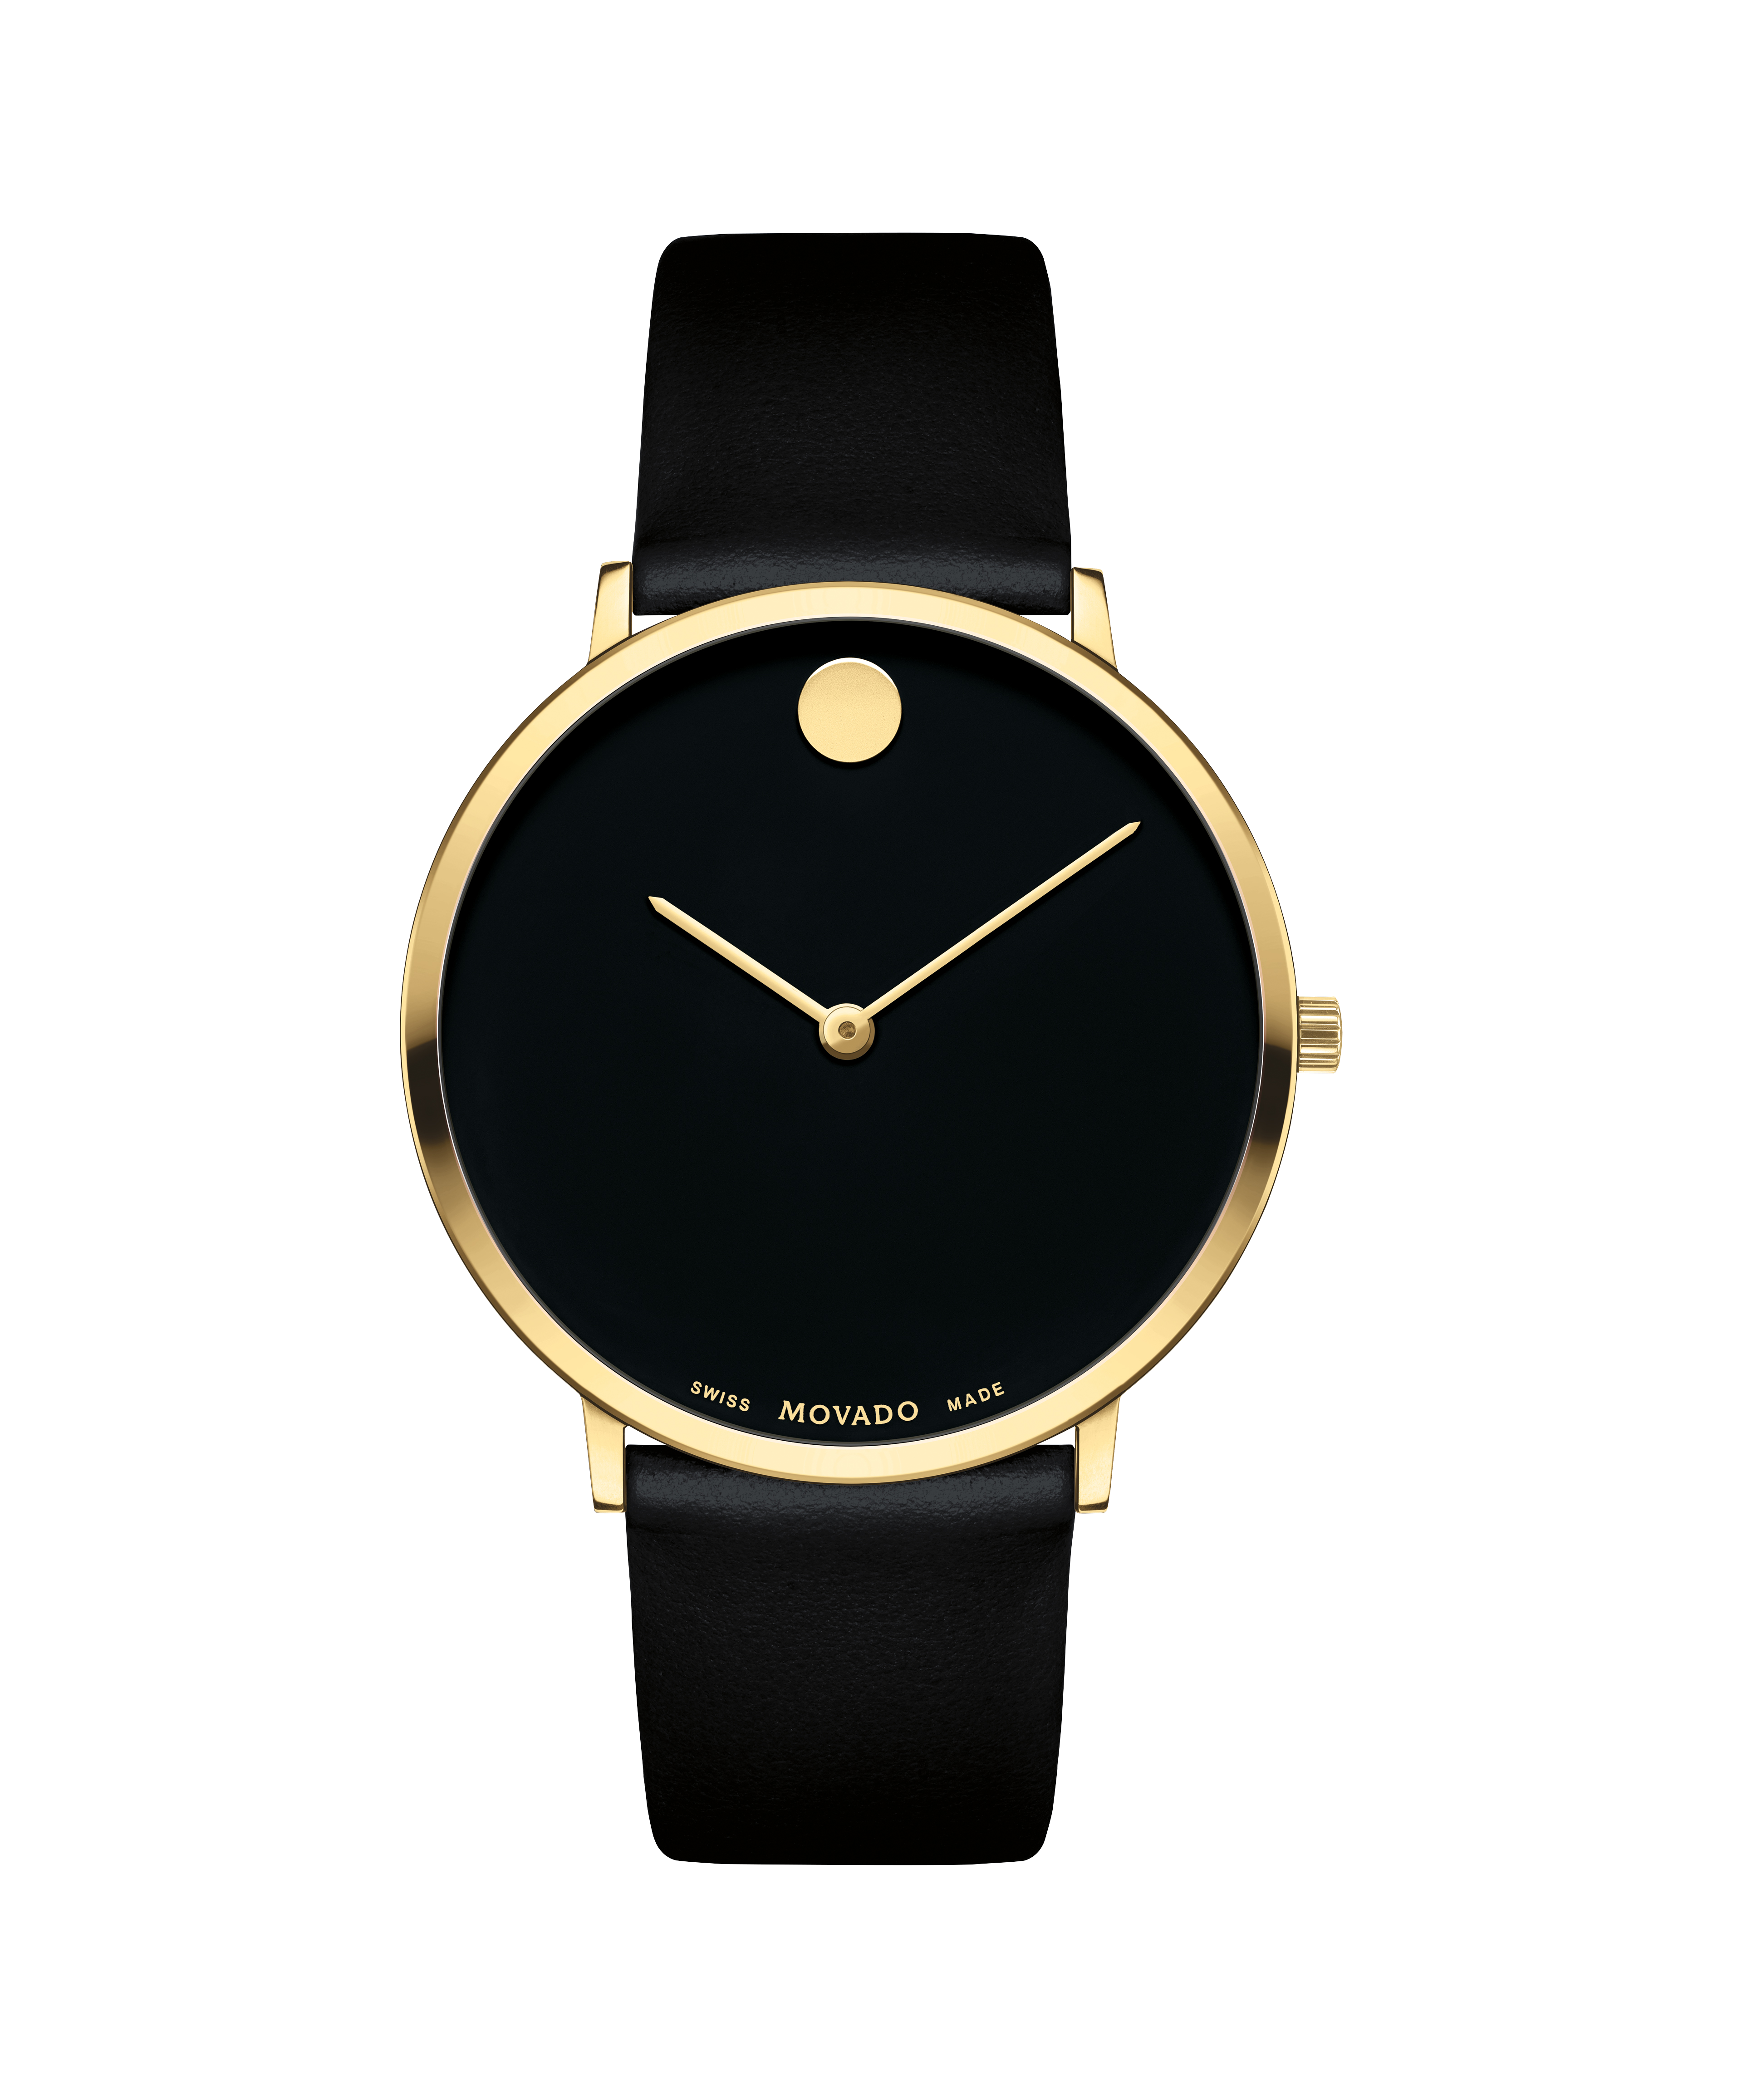 Movado Calendoplan 13322 in 9ct Gold 1953